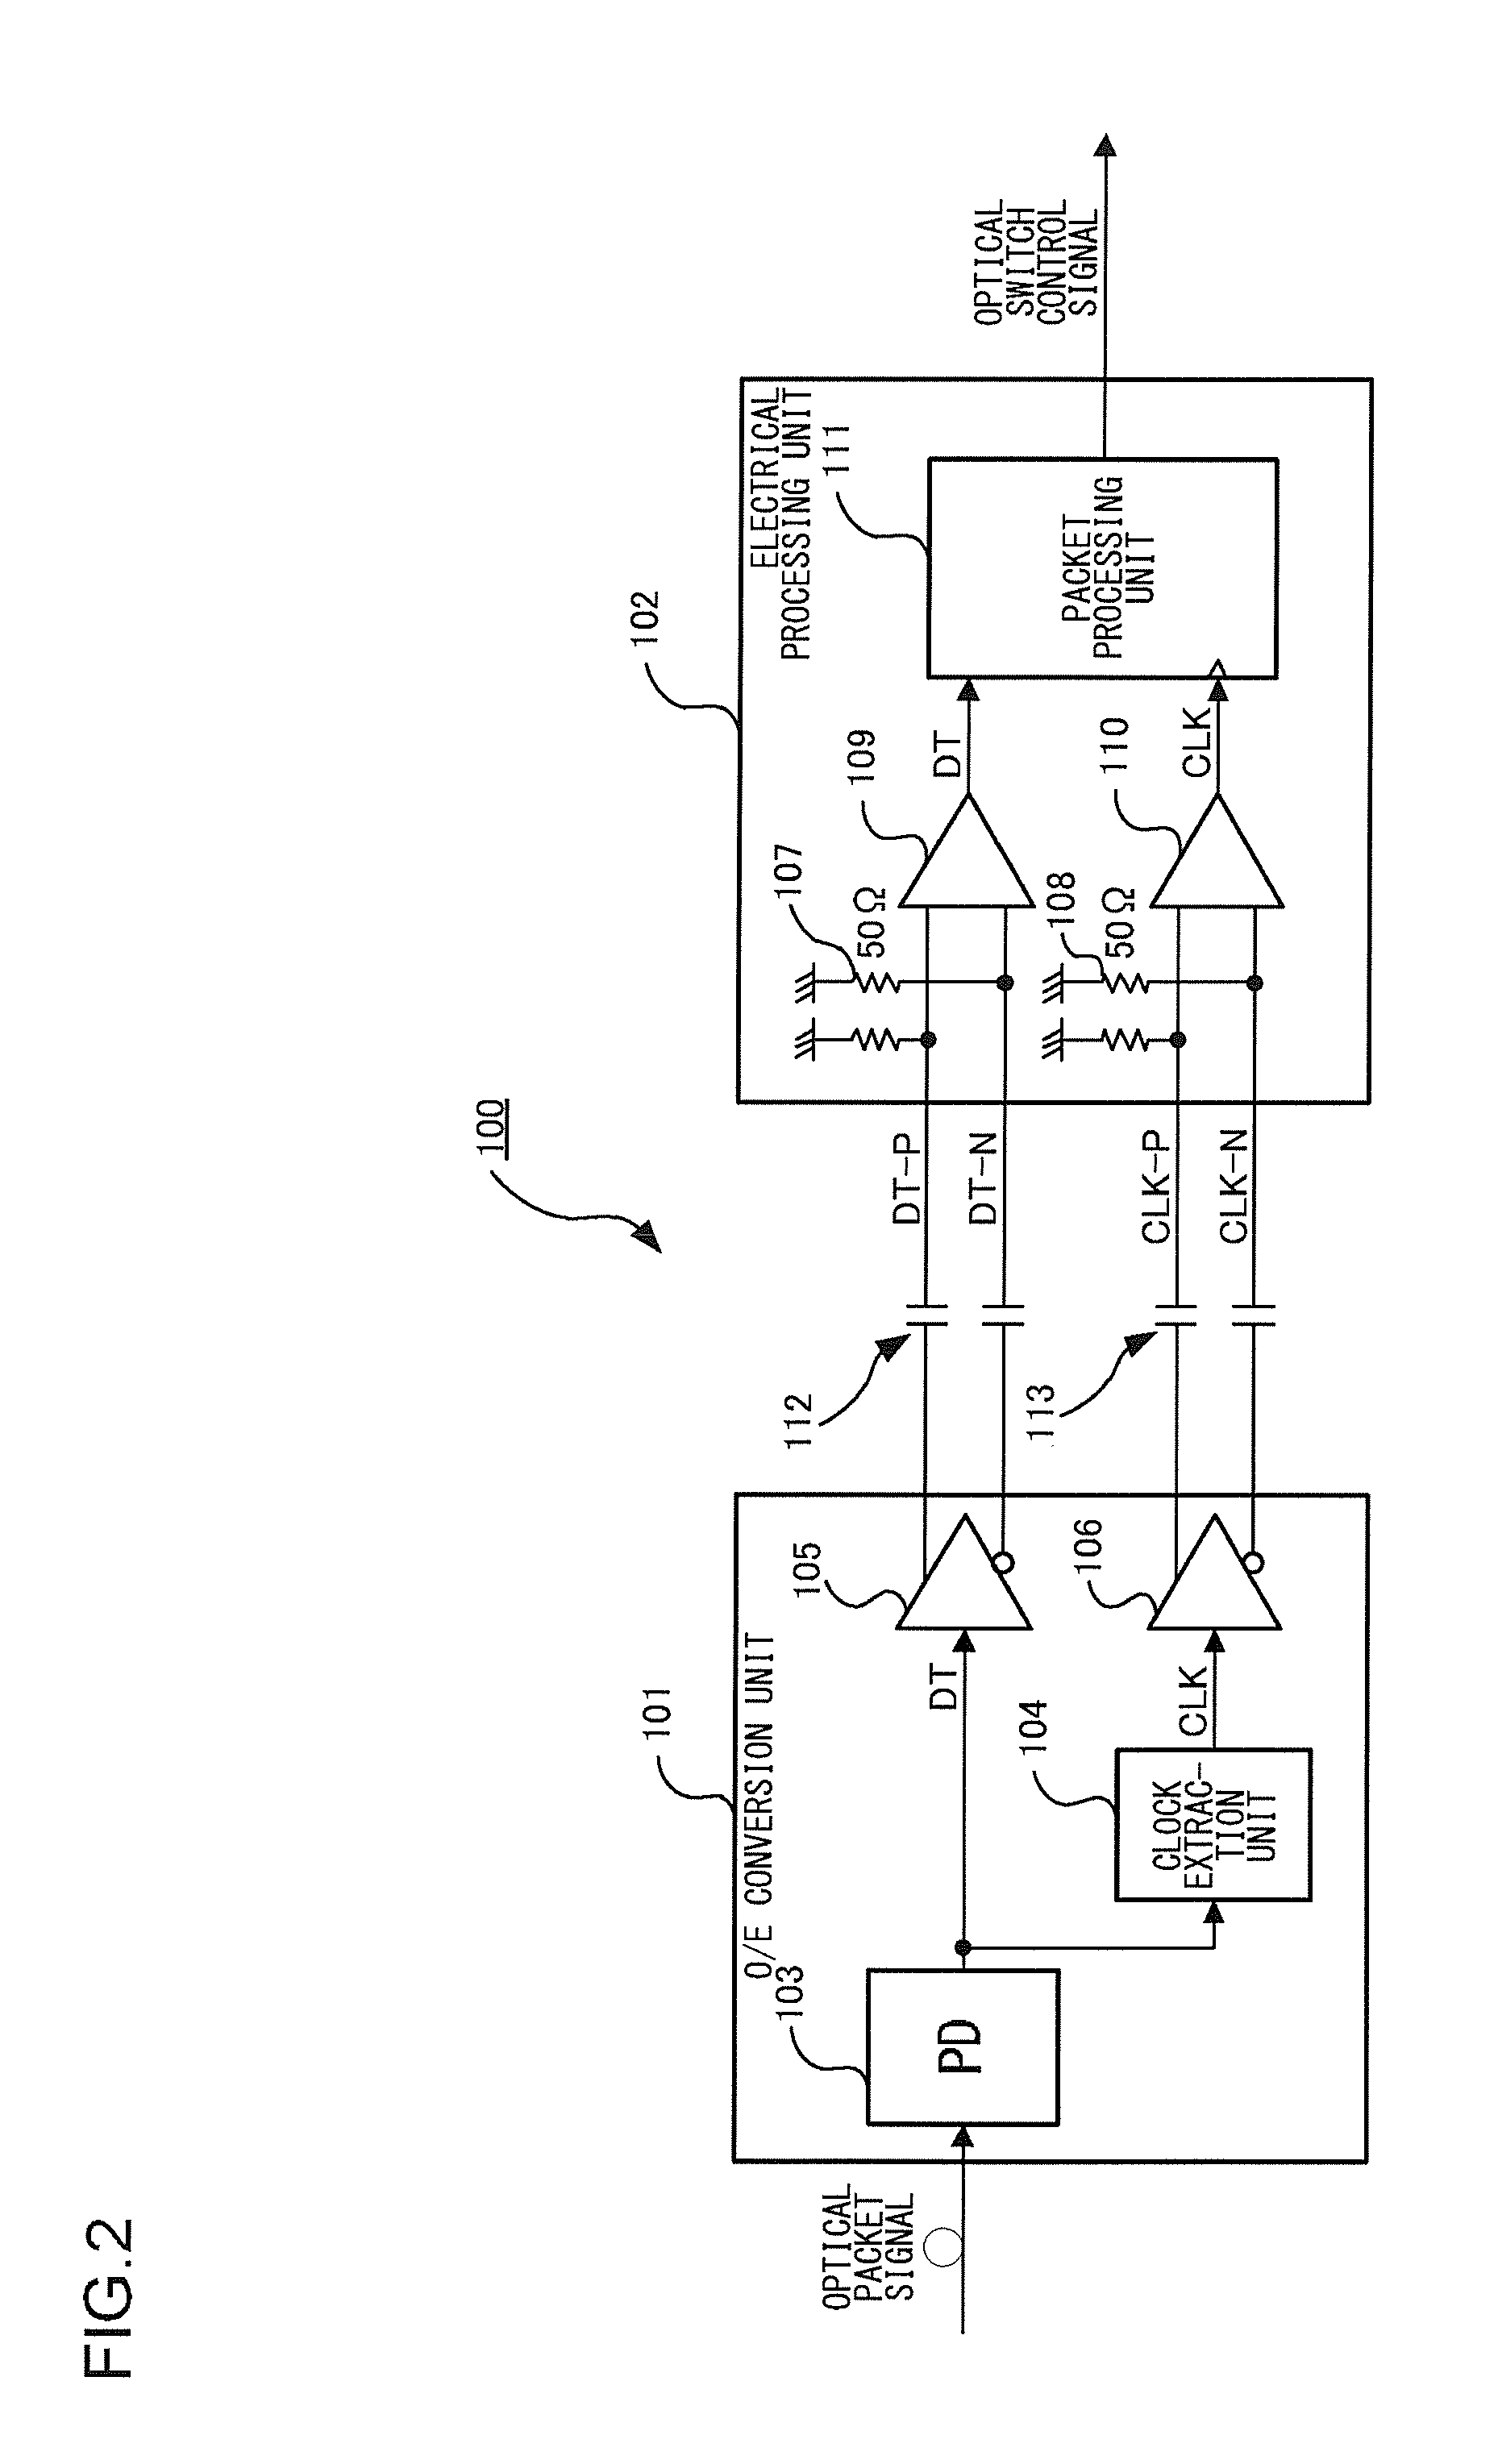 Optical packet switching apparatus